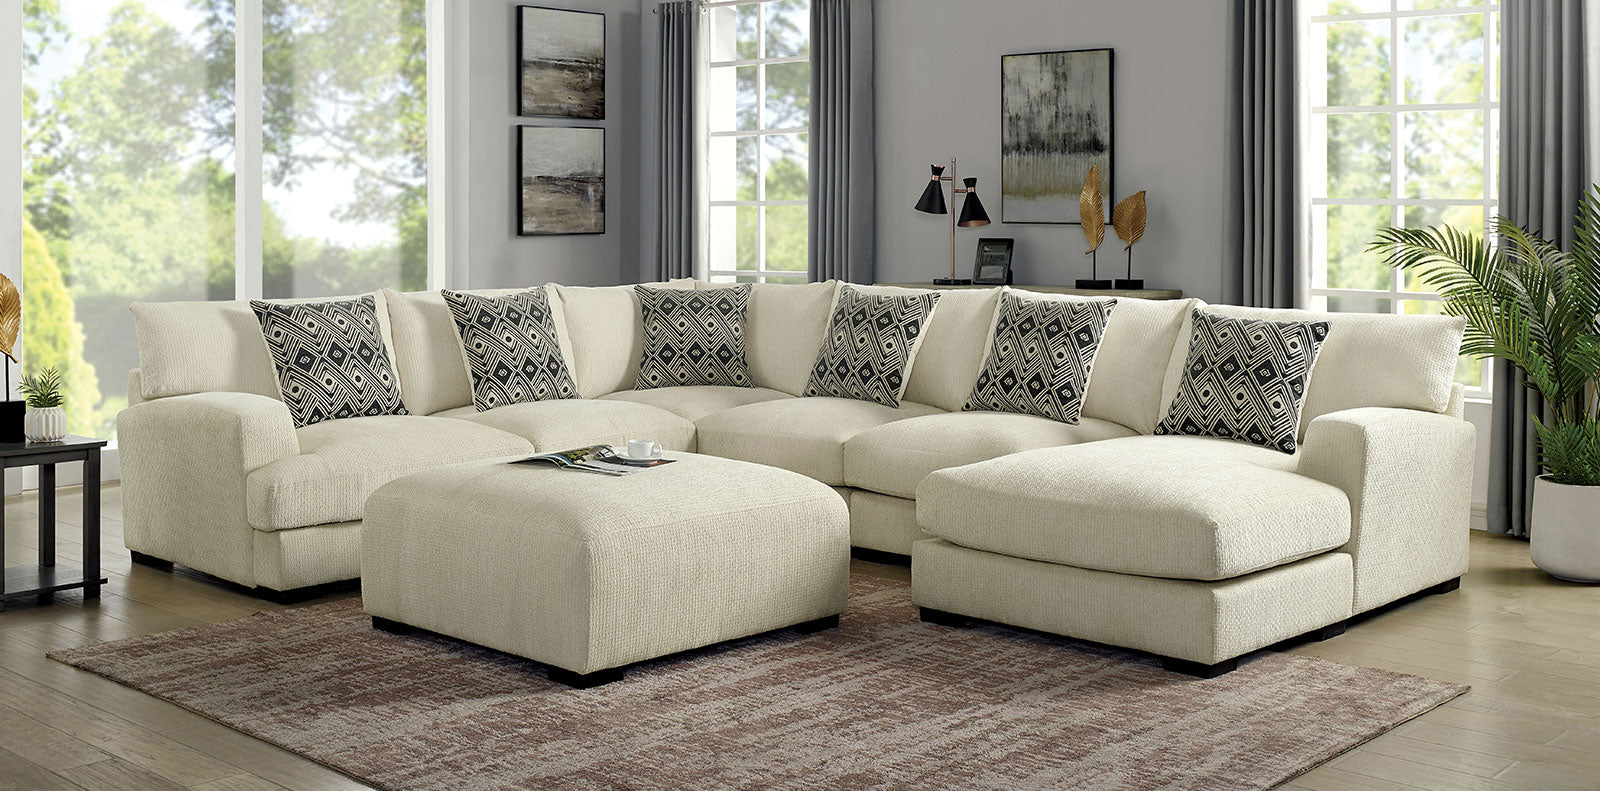 KAYLEE U-Shaped Sectional + Ottoman, Right Chaise image